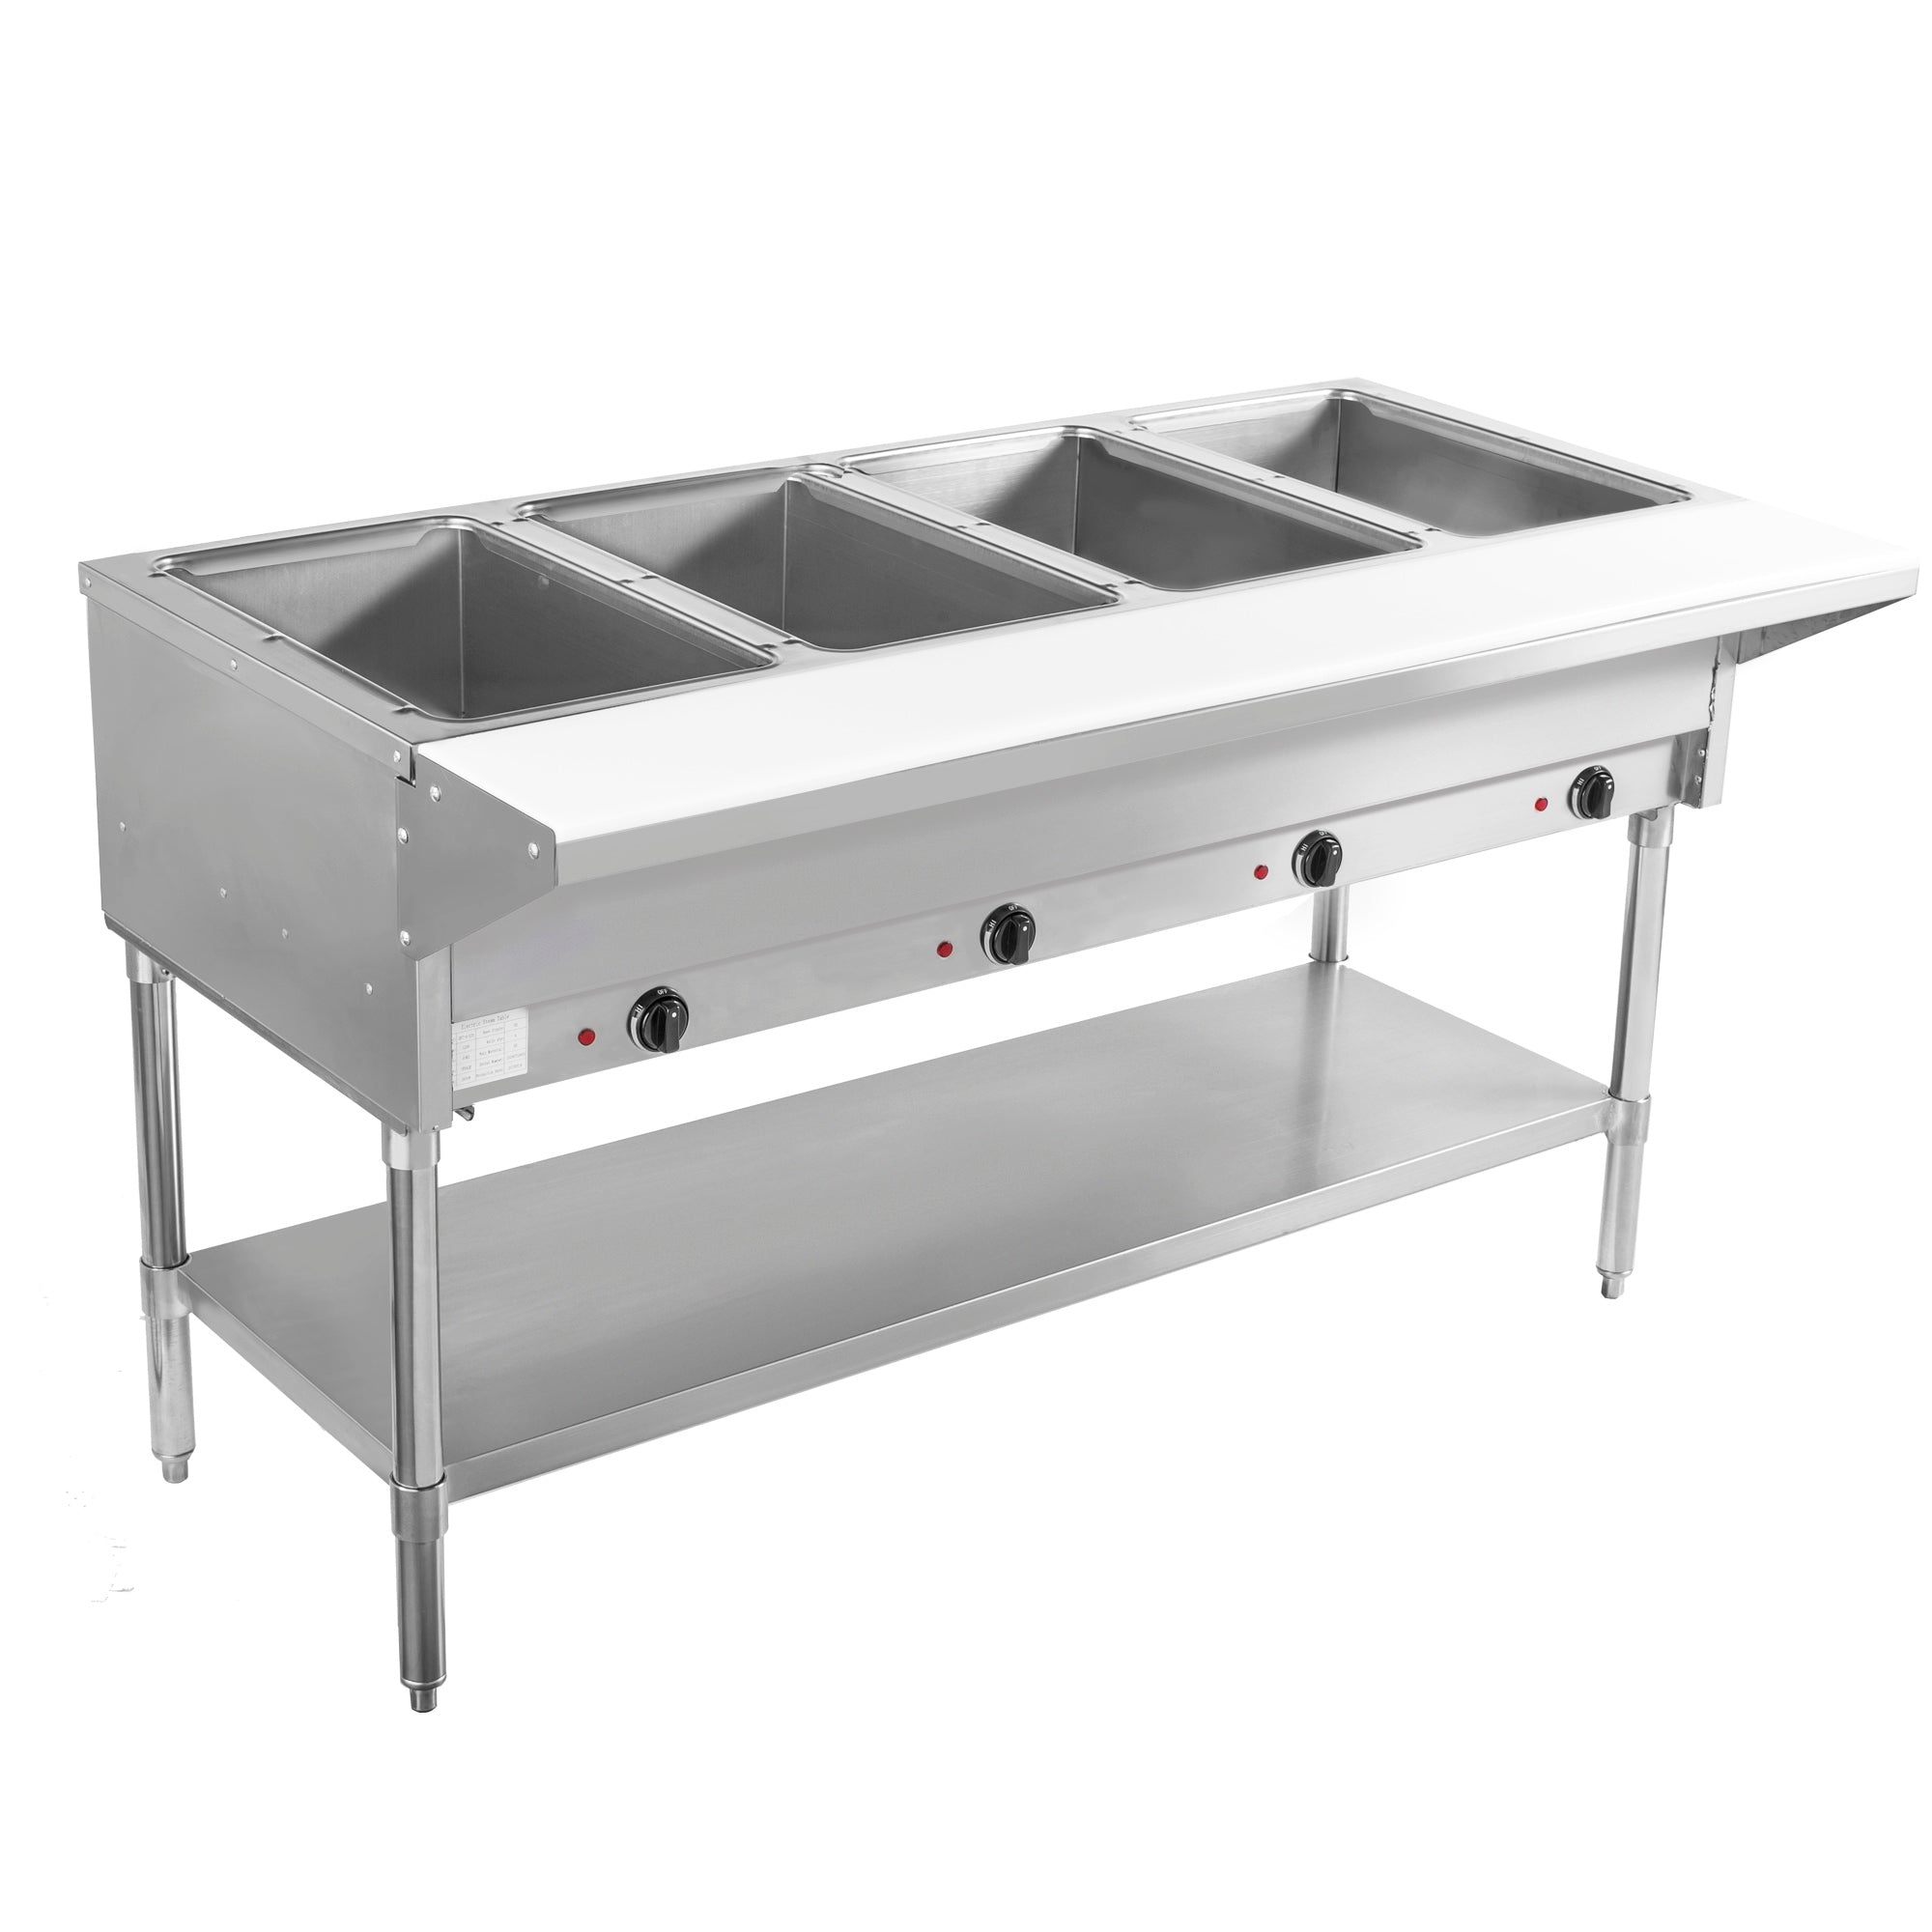 BevLes - BVST-4-240, BevLes 4 Well Electric Steam Table, 230V, in Silver